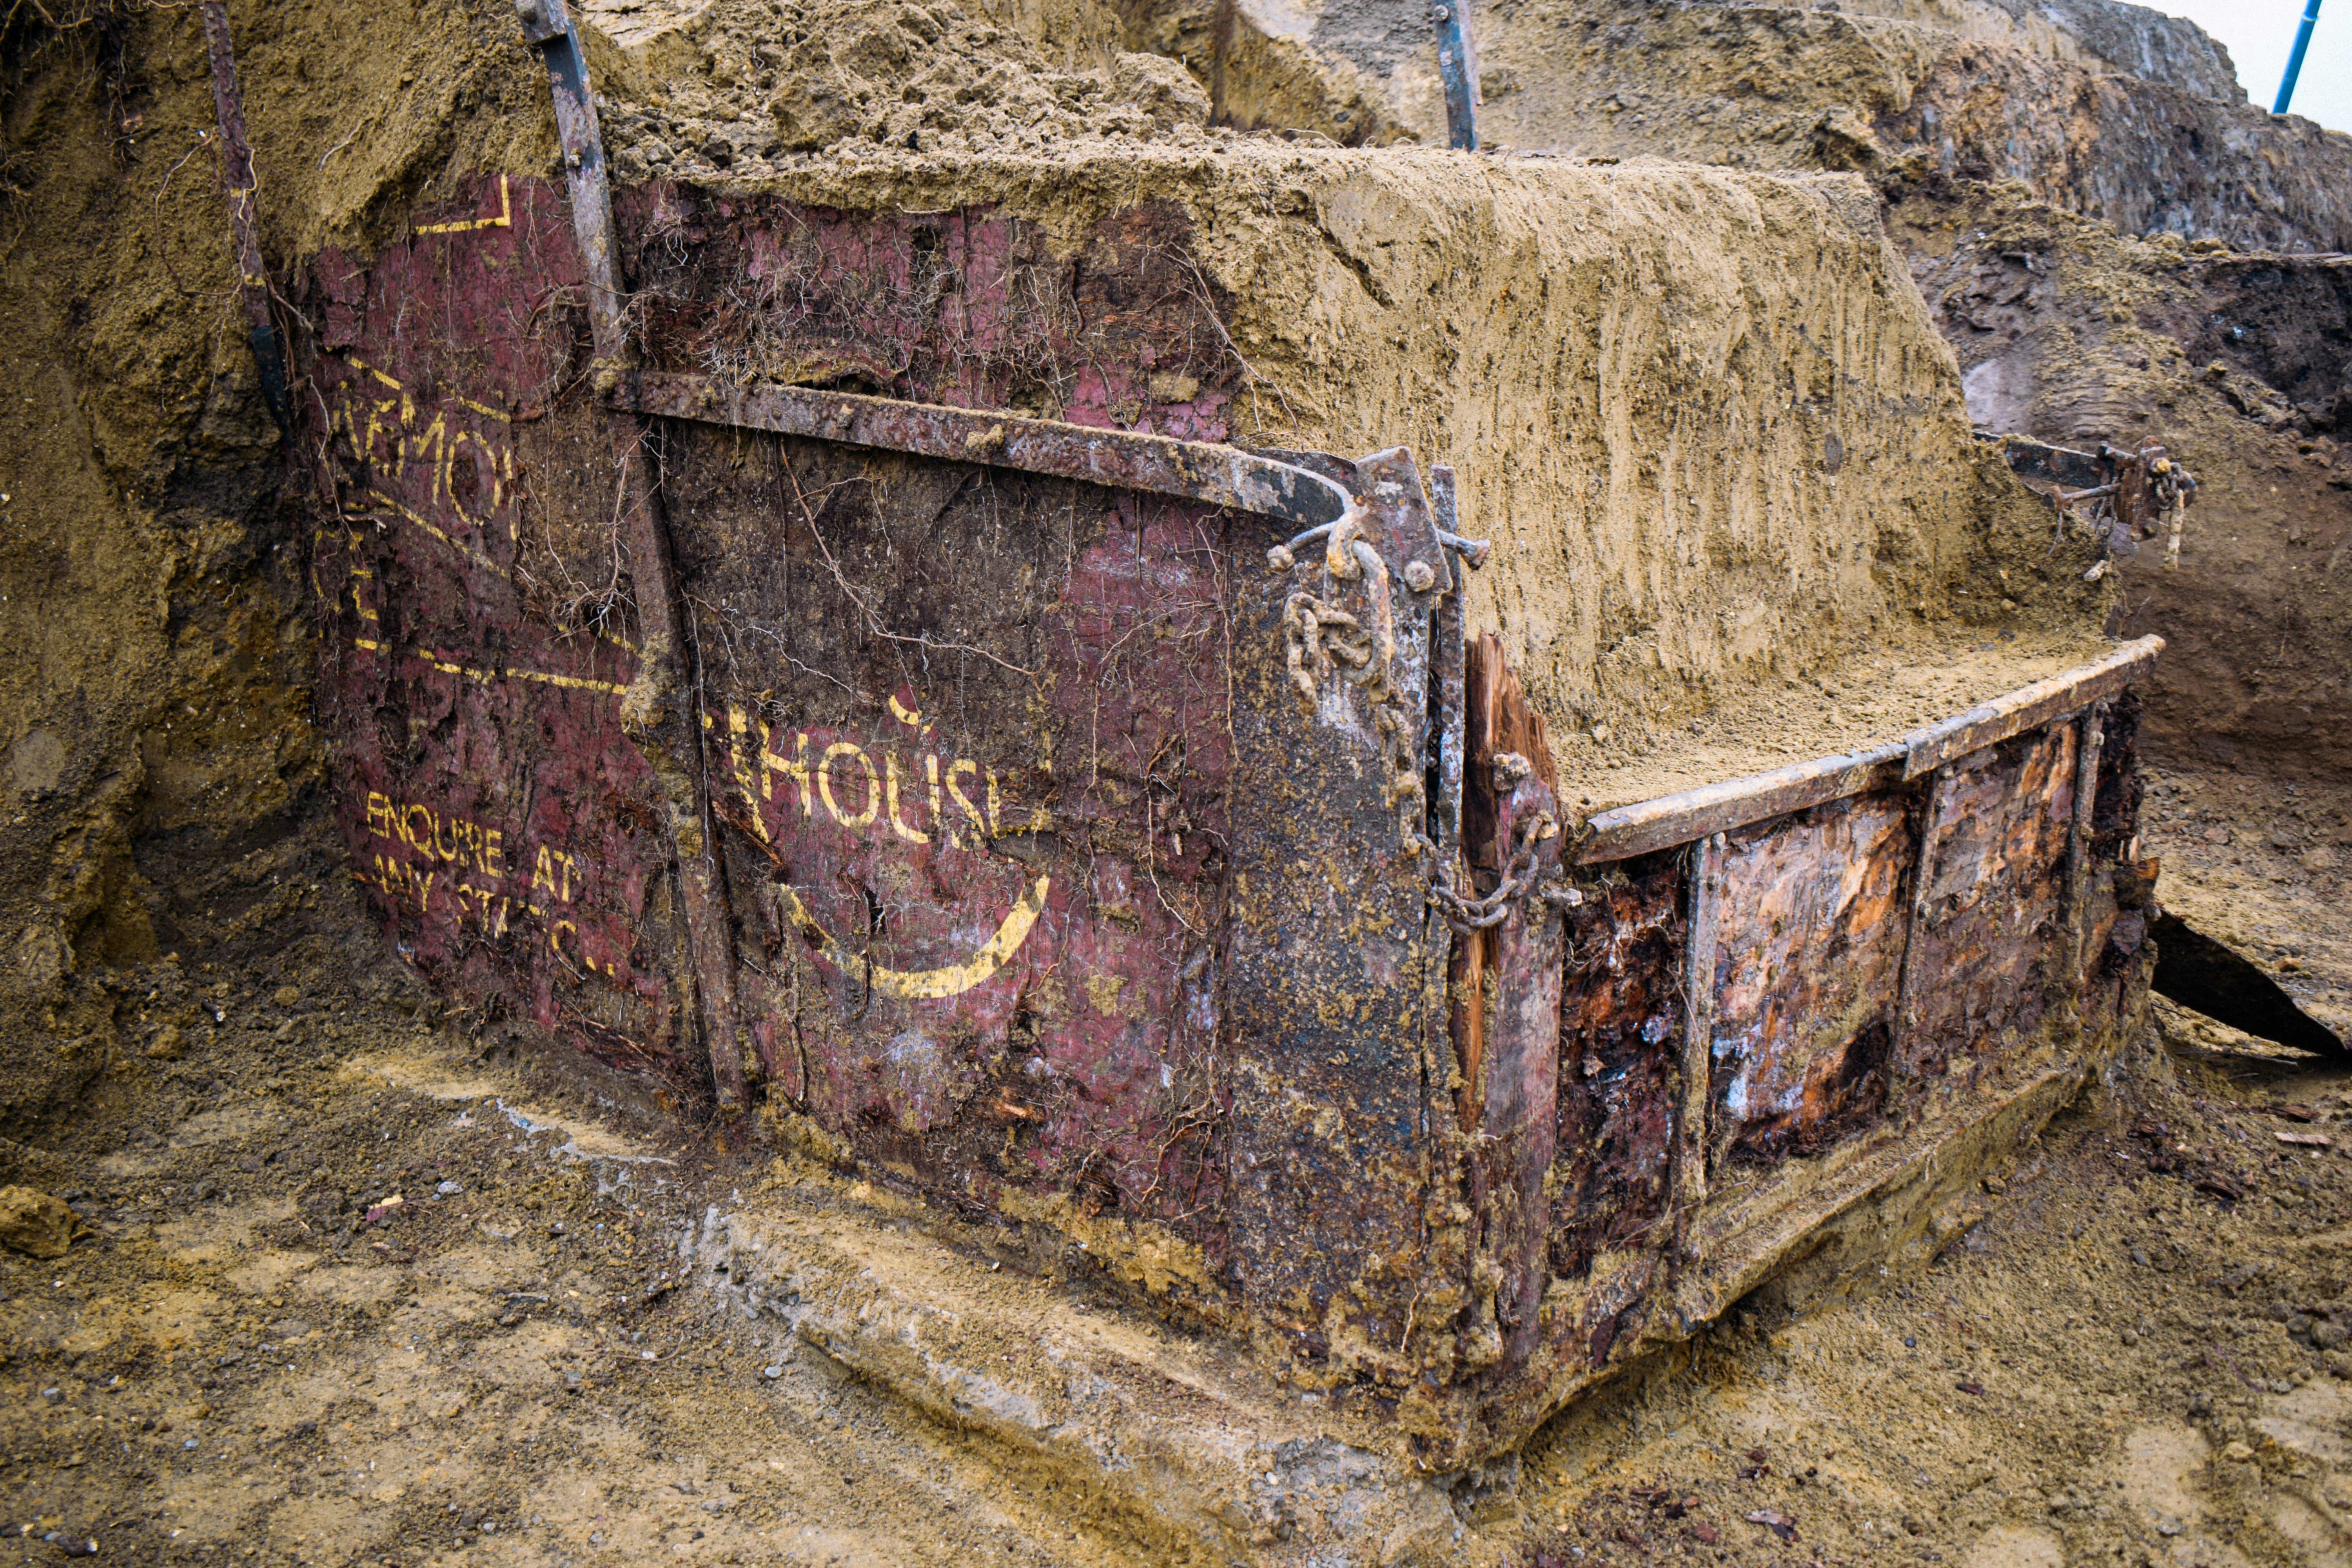 New Light Shed On Mystery One Hundred-Year-Old LNER Wagon Found Buried In Belgium